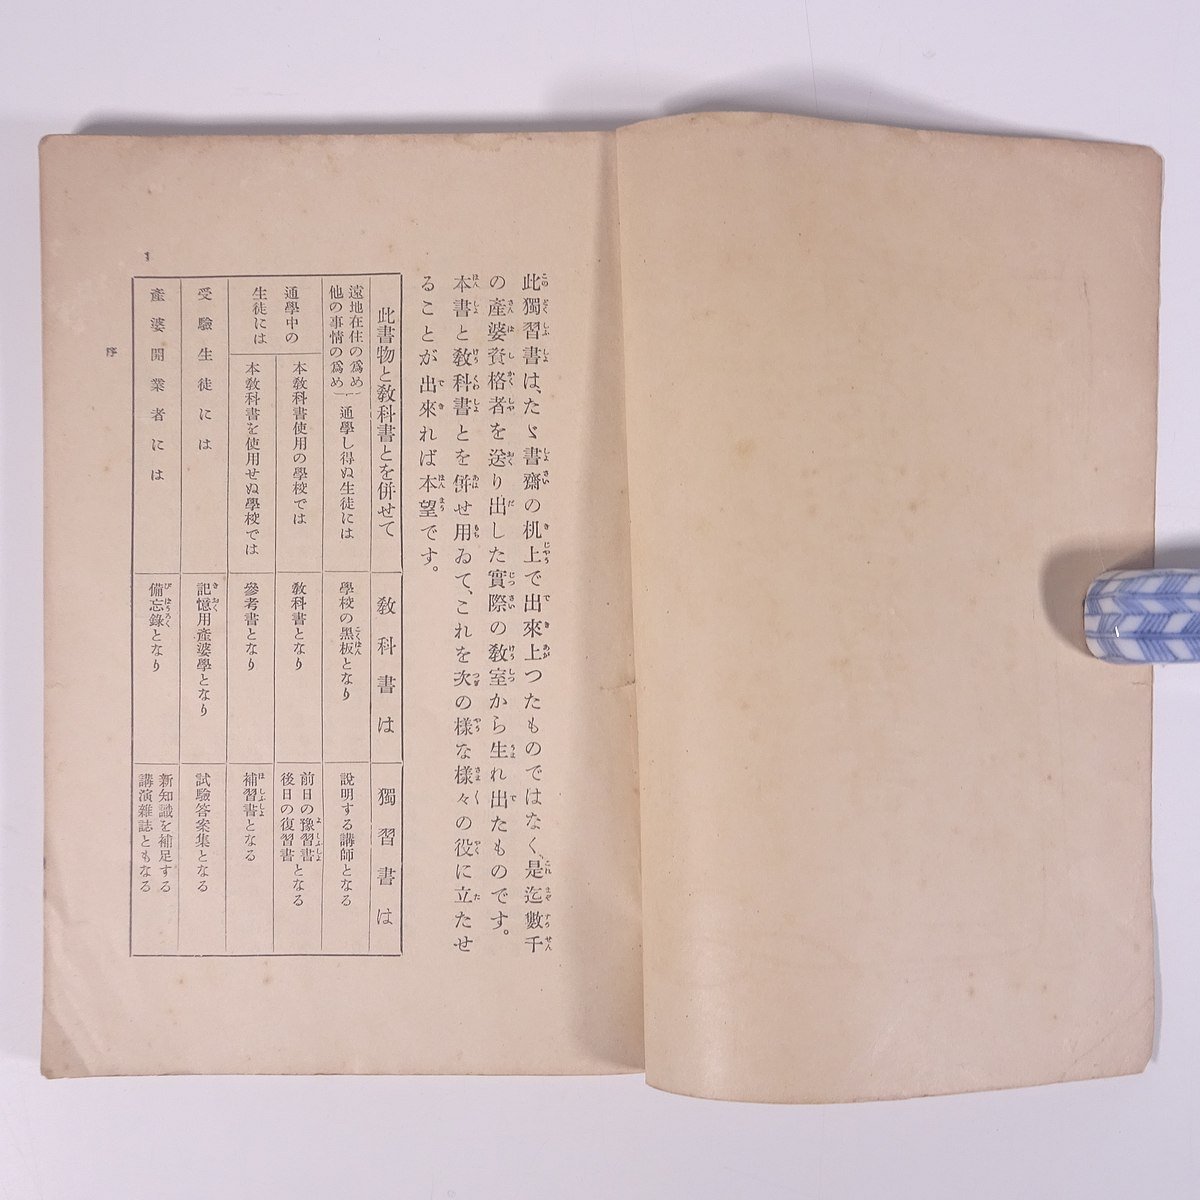  production .... paper the fifth volume abnormality pregnancy .. interval . confidence Tokyo . production woman school Showa era one two year 1937 old book separate volume . production . midwife production . pregnancy birth * writing equipped 